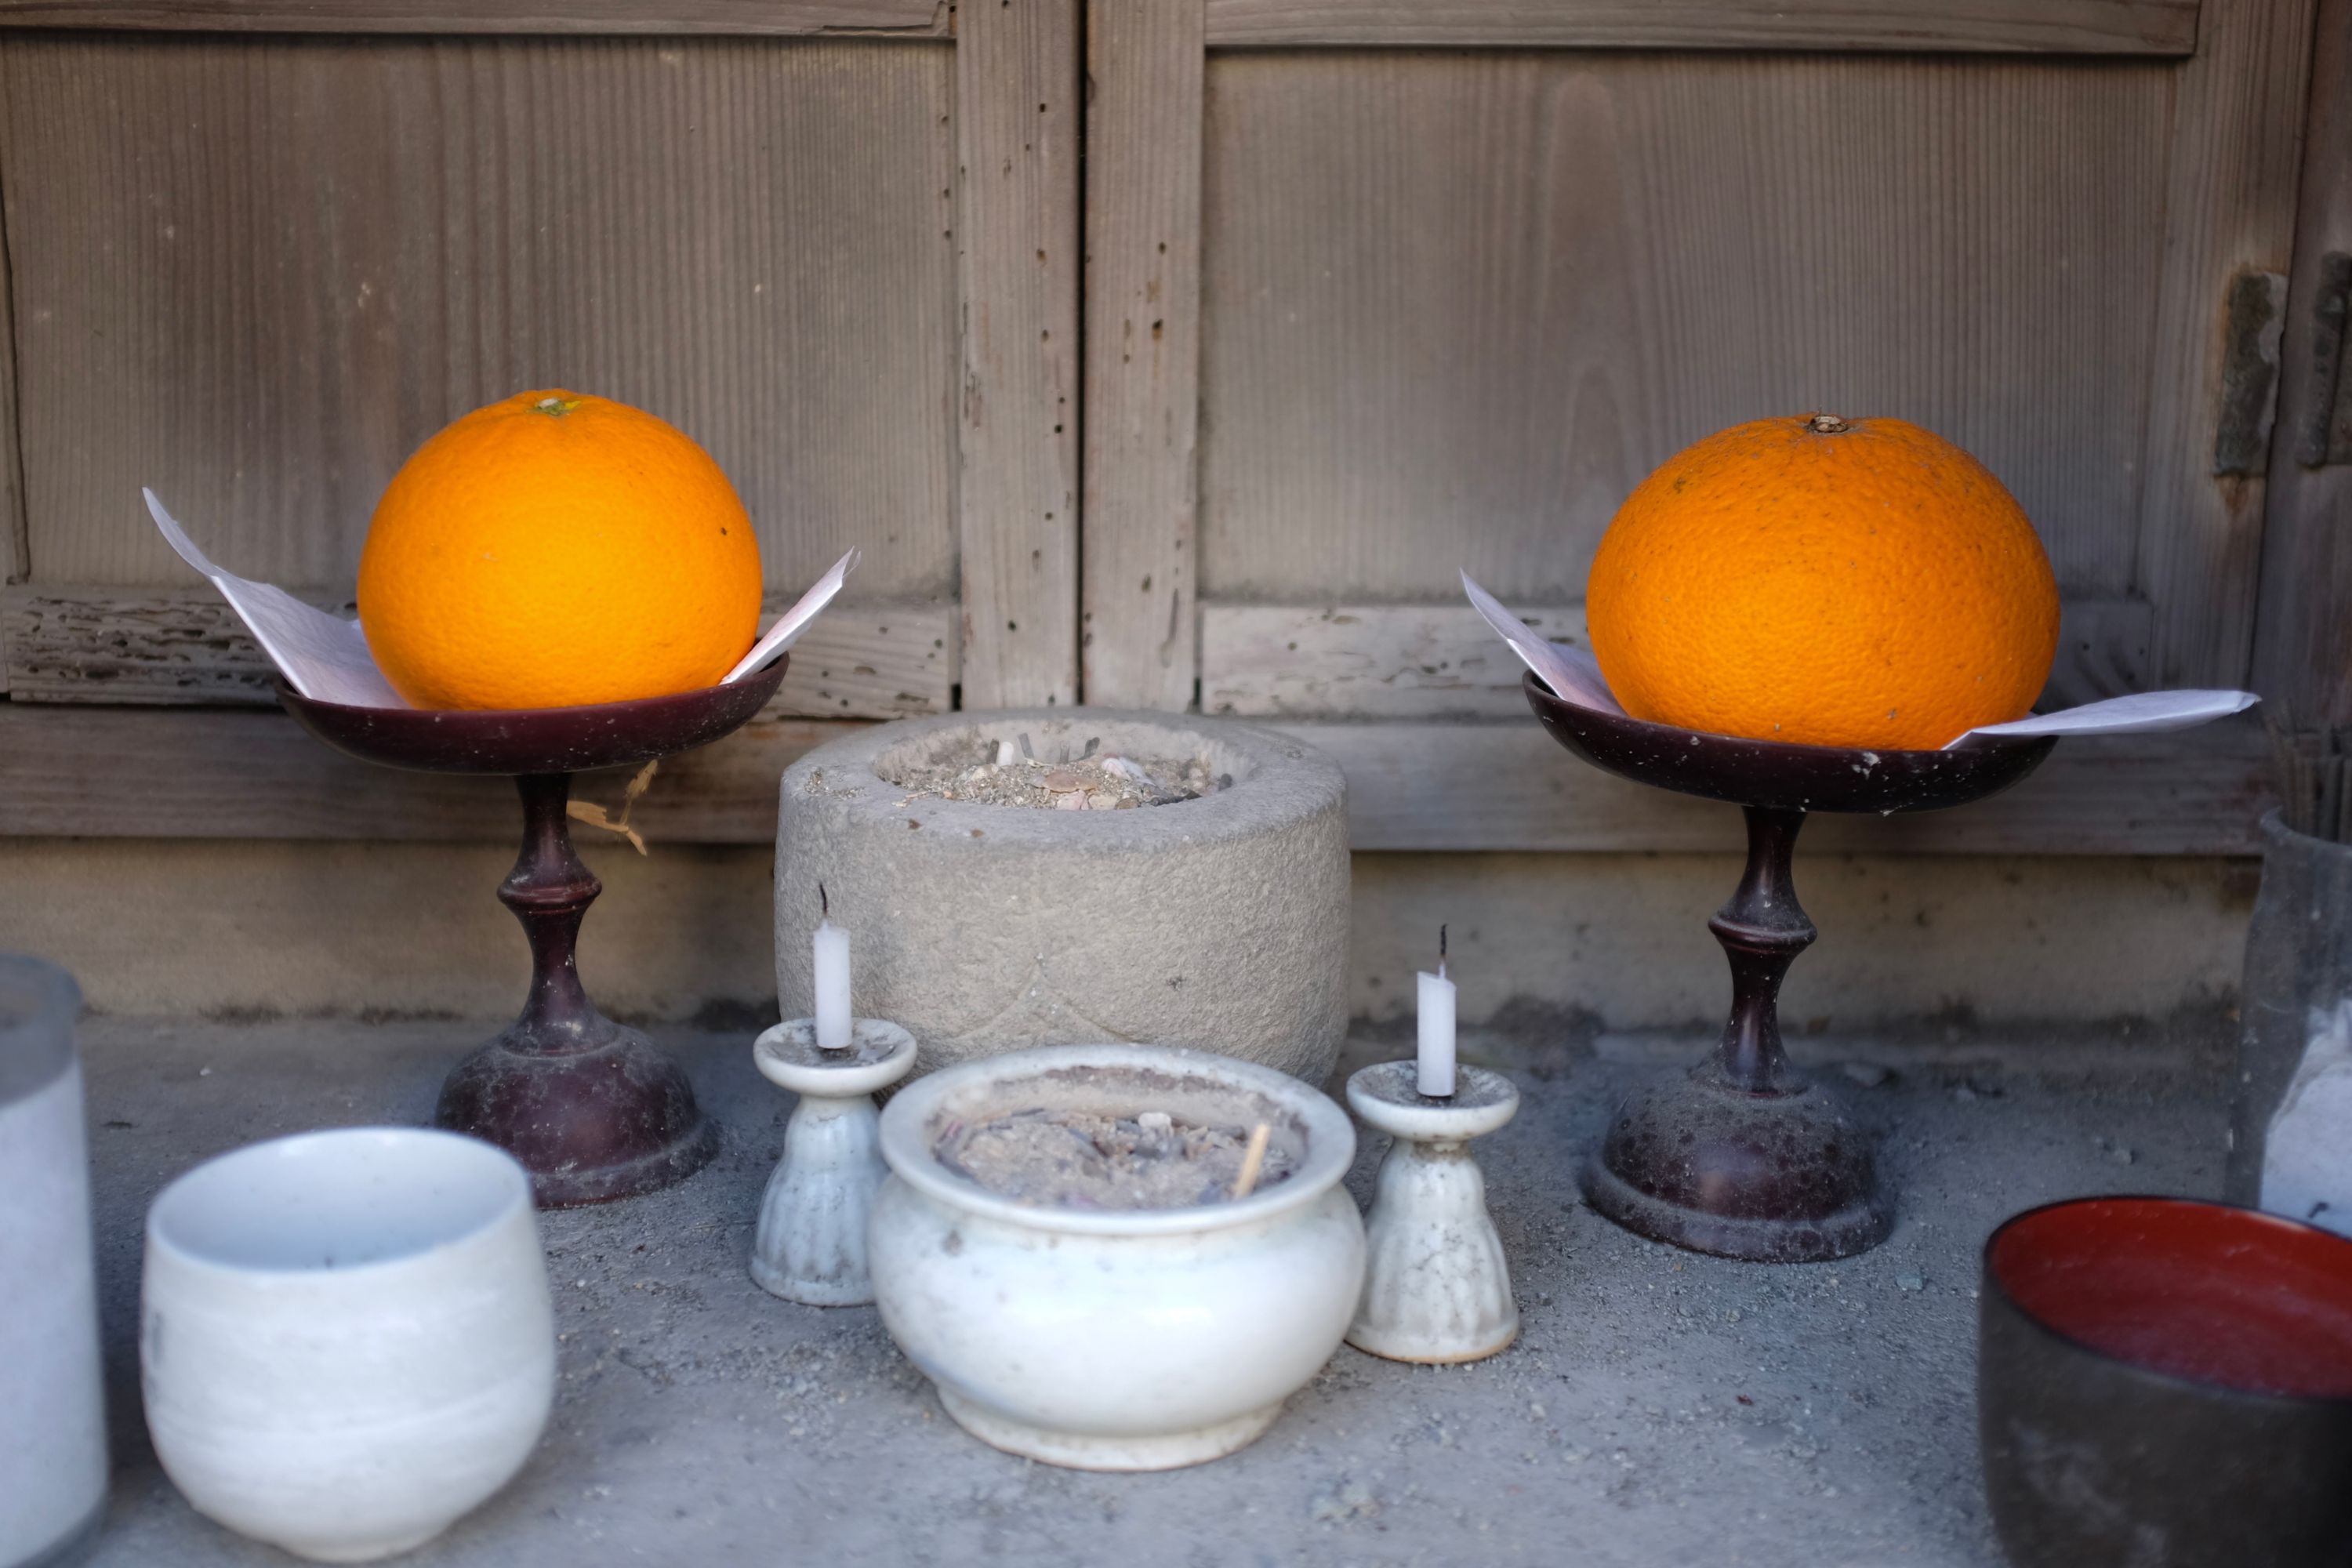 Two oranges presented beautifully at a shrine.